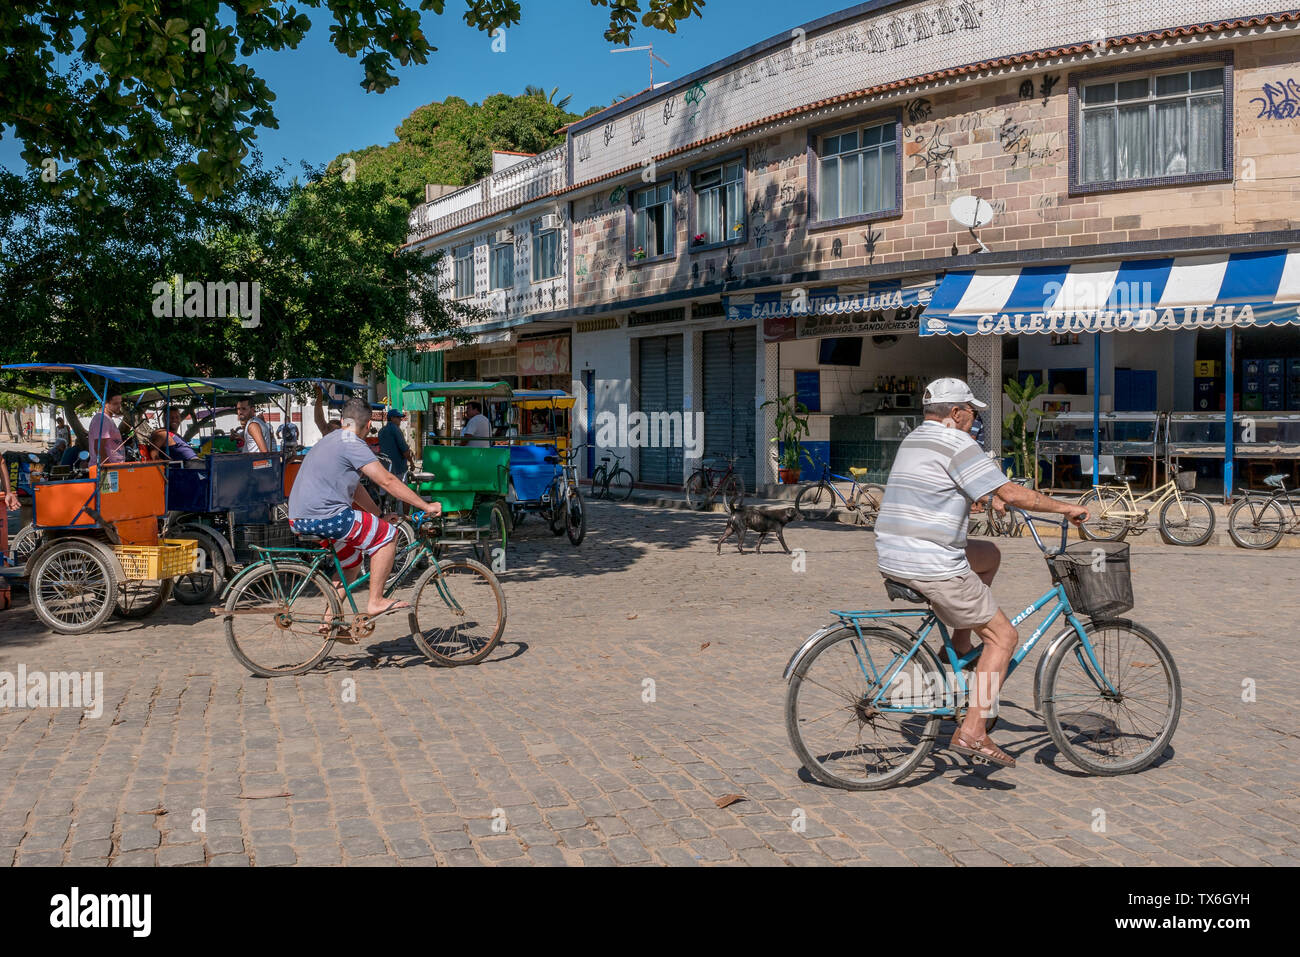 Rio de Janeiro, Brazil - June 22, 2019: the main square of Paqueta Island with people and bycicles on the street. Stock Photo